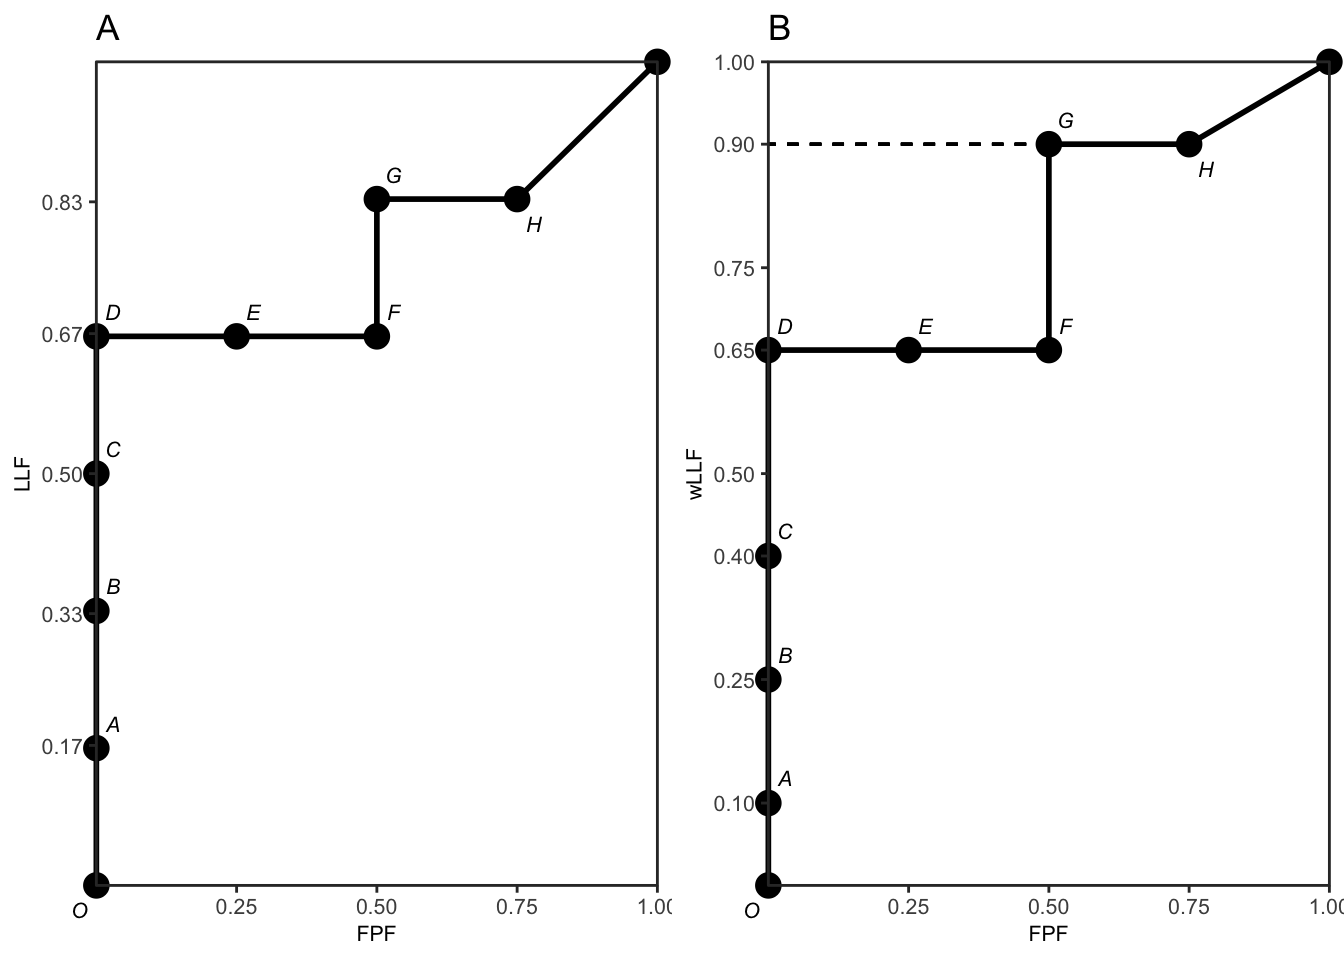 Plot A: The empirical AFROC plot for the data shown in Table \@ref(tab:froc-meanings-table-non-diseased) and Table \@ref(tab:froc-meanings-table-diseased). The labels correspond to the last columns of the tables. The corresponding one-dimensional depiction is plot A in Fig. \@ref(fig:froc-meanings-linear-plot-afroc-wafroc). The area under the empirical plot is 0.7708. Plot B: The empirical weighted-AFROC (wAFROC) plot for the data shown in Table \@ref(tab:froc-meanings-table-non-diseased) and Table \@ref(tab:froc-meanings-table-diseased). The corresponding one-dimensional plot is plot B in Fig. \@ref(fig:froc-meanings-linear-plot-afroc-wafroc). The area under the wAFROC is 0.7875. 